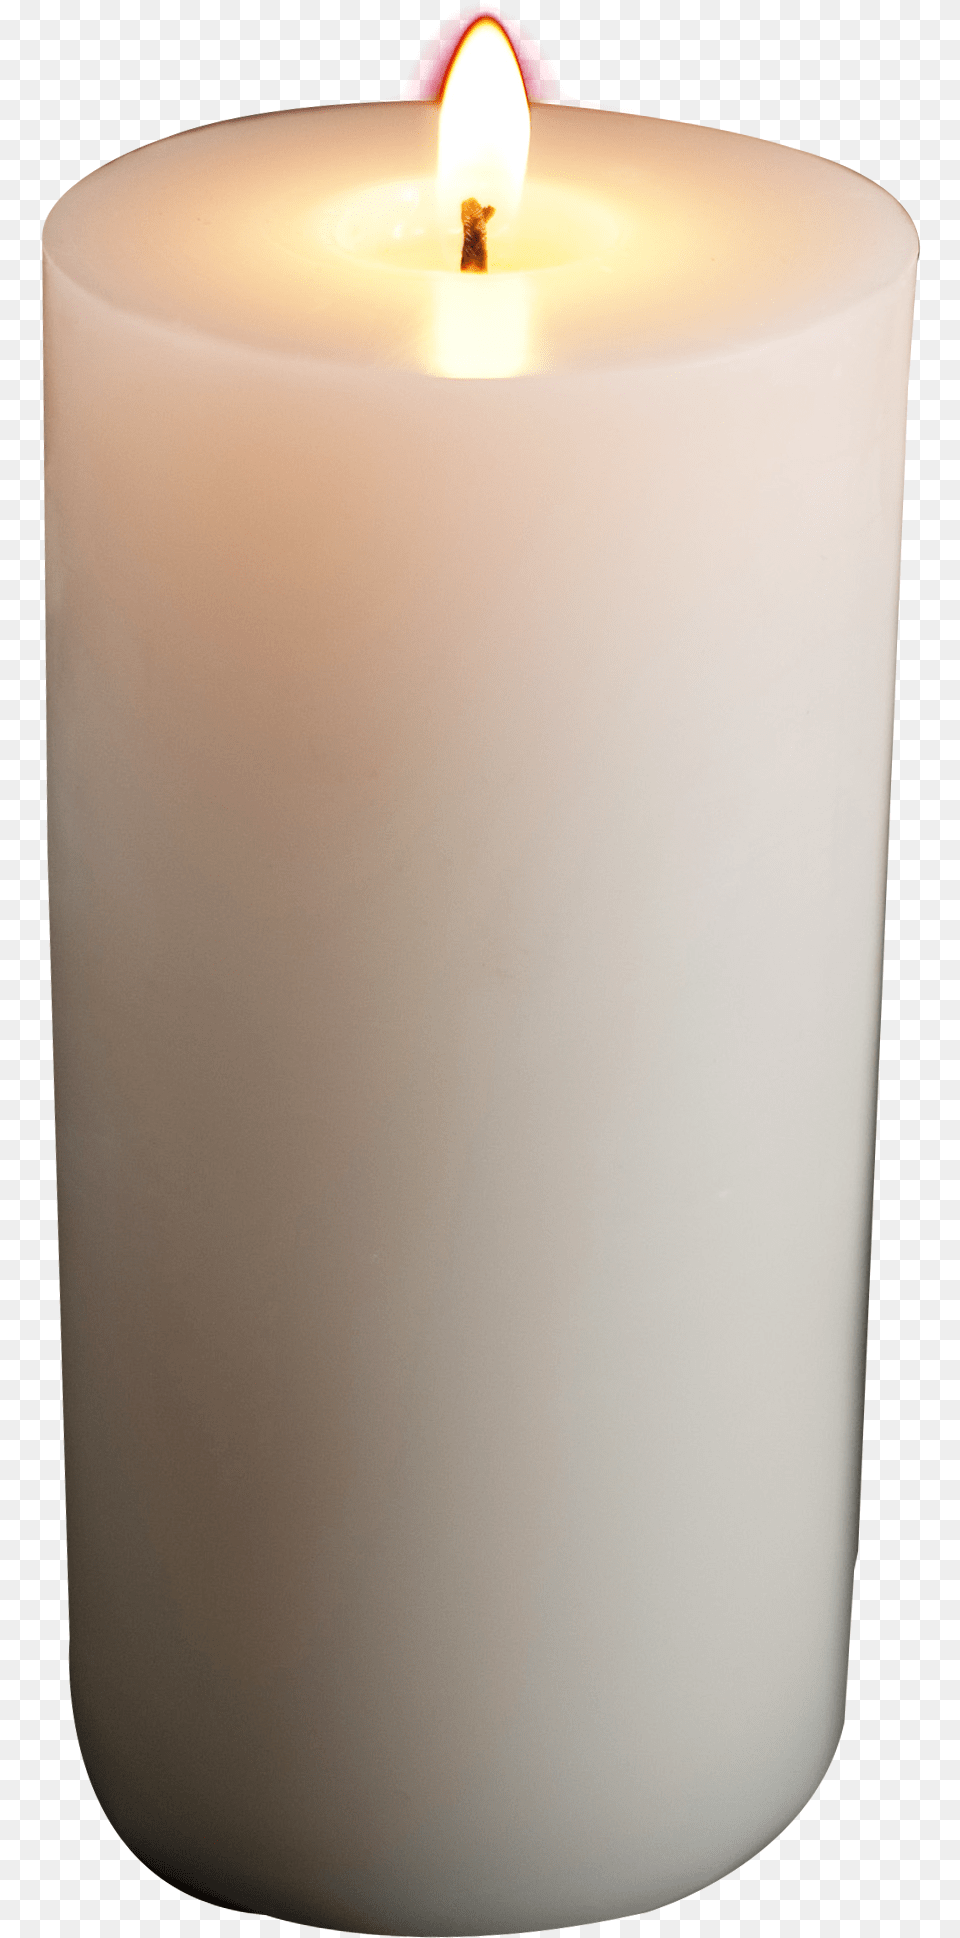 Candle Image Pngpix Background Candles Free Transparent Png